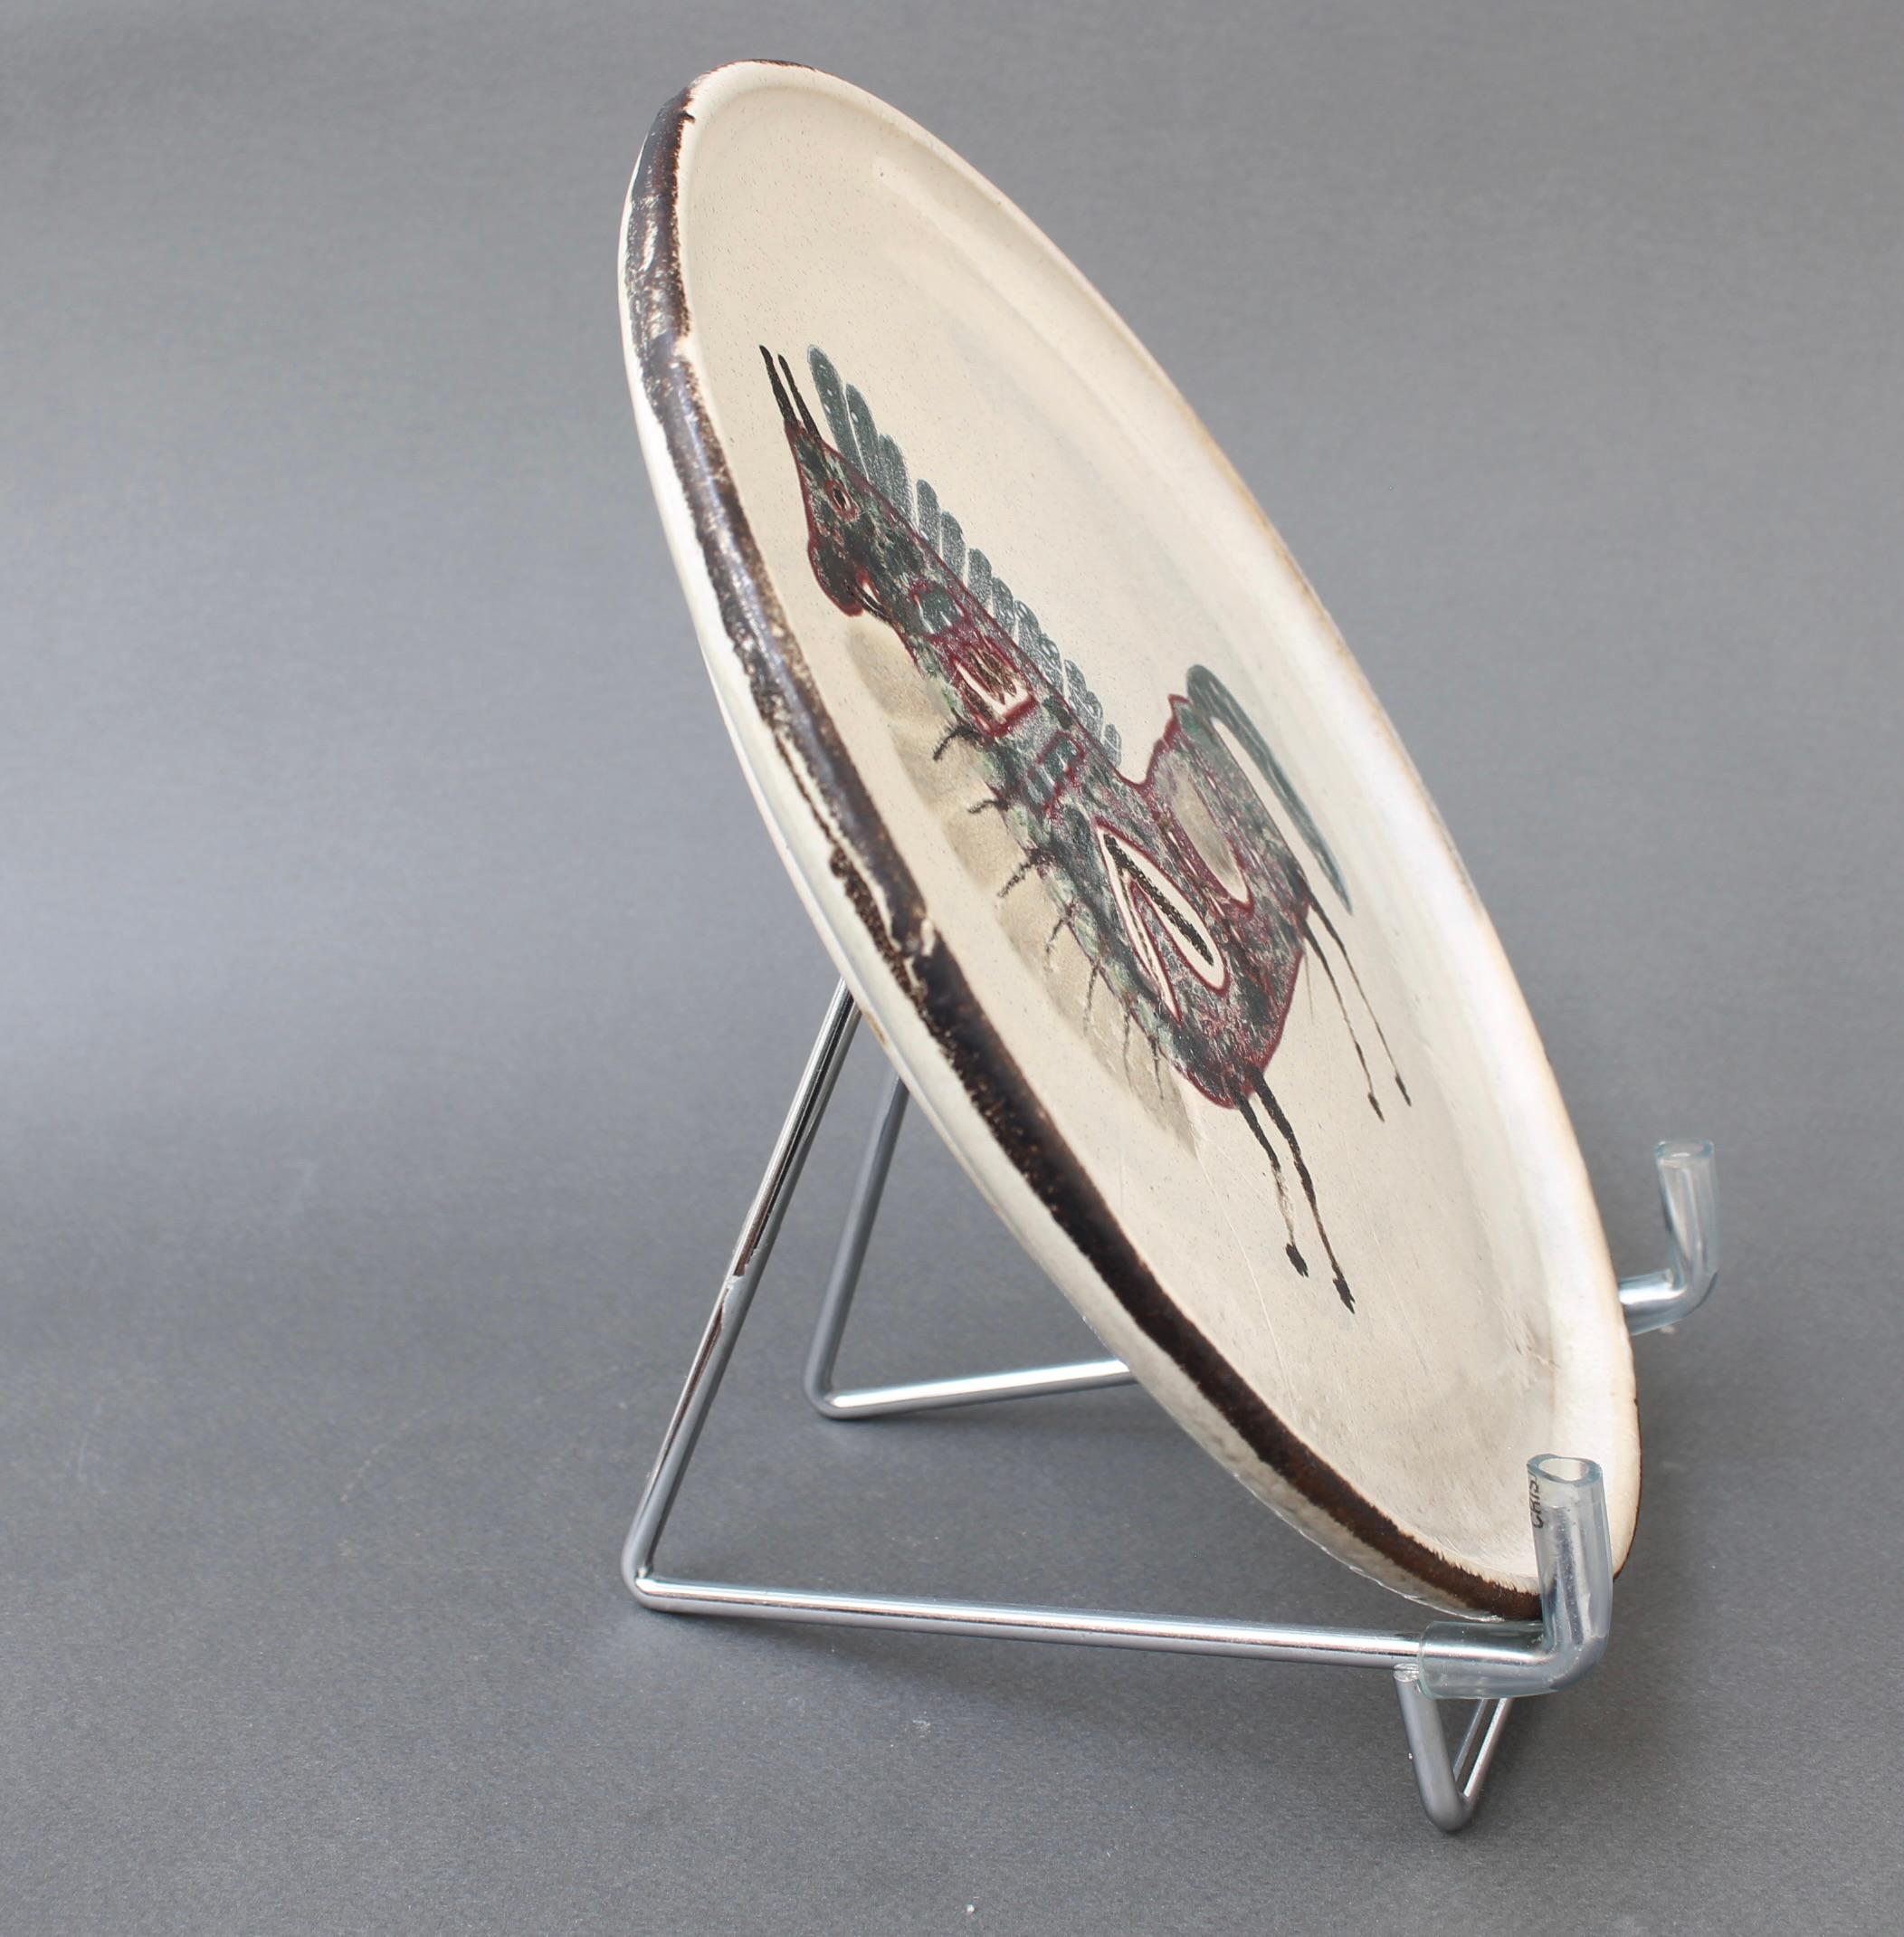 Hand-Painted Mid-Century French Ceramic Decorative Plate by Le Mûrier (circa 1960s) For Sale